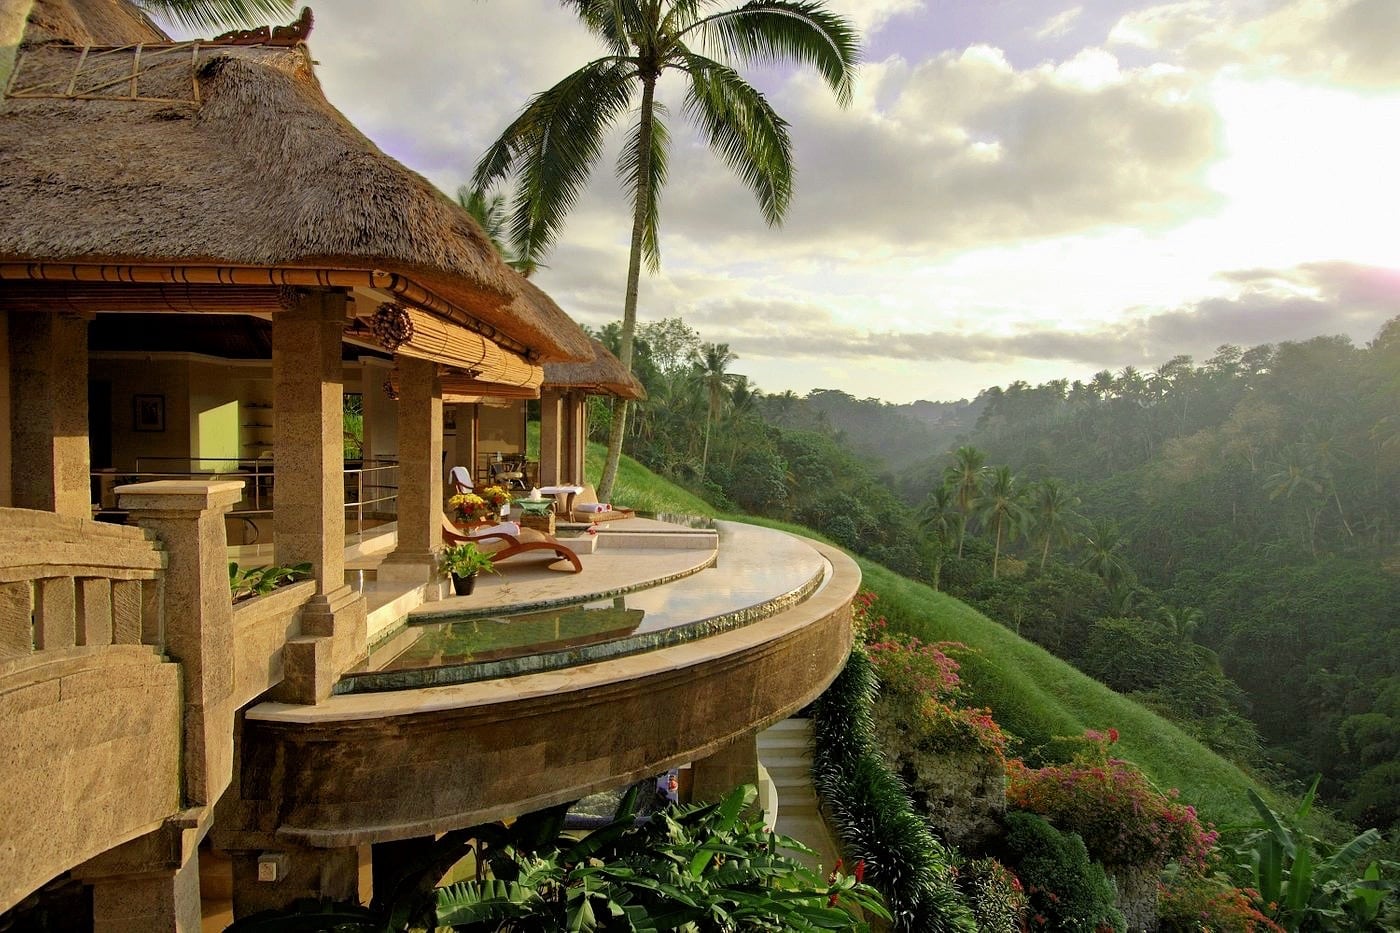 best places to stay in Bali